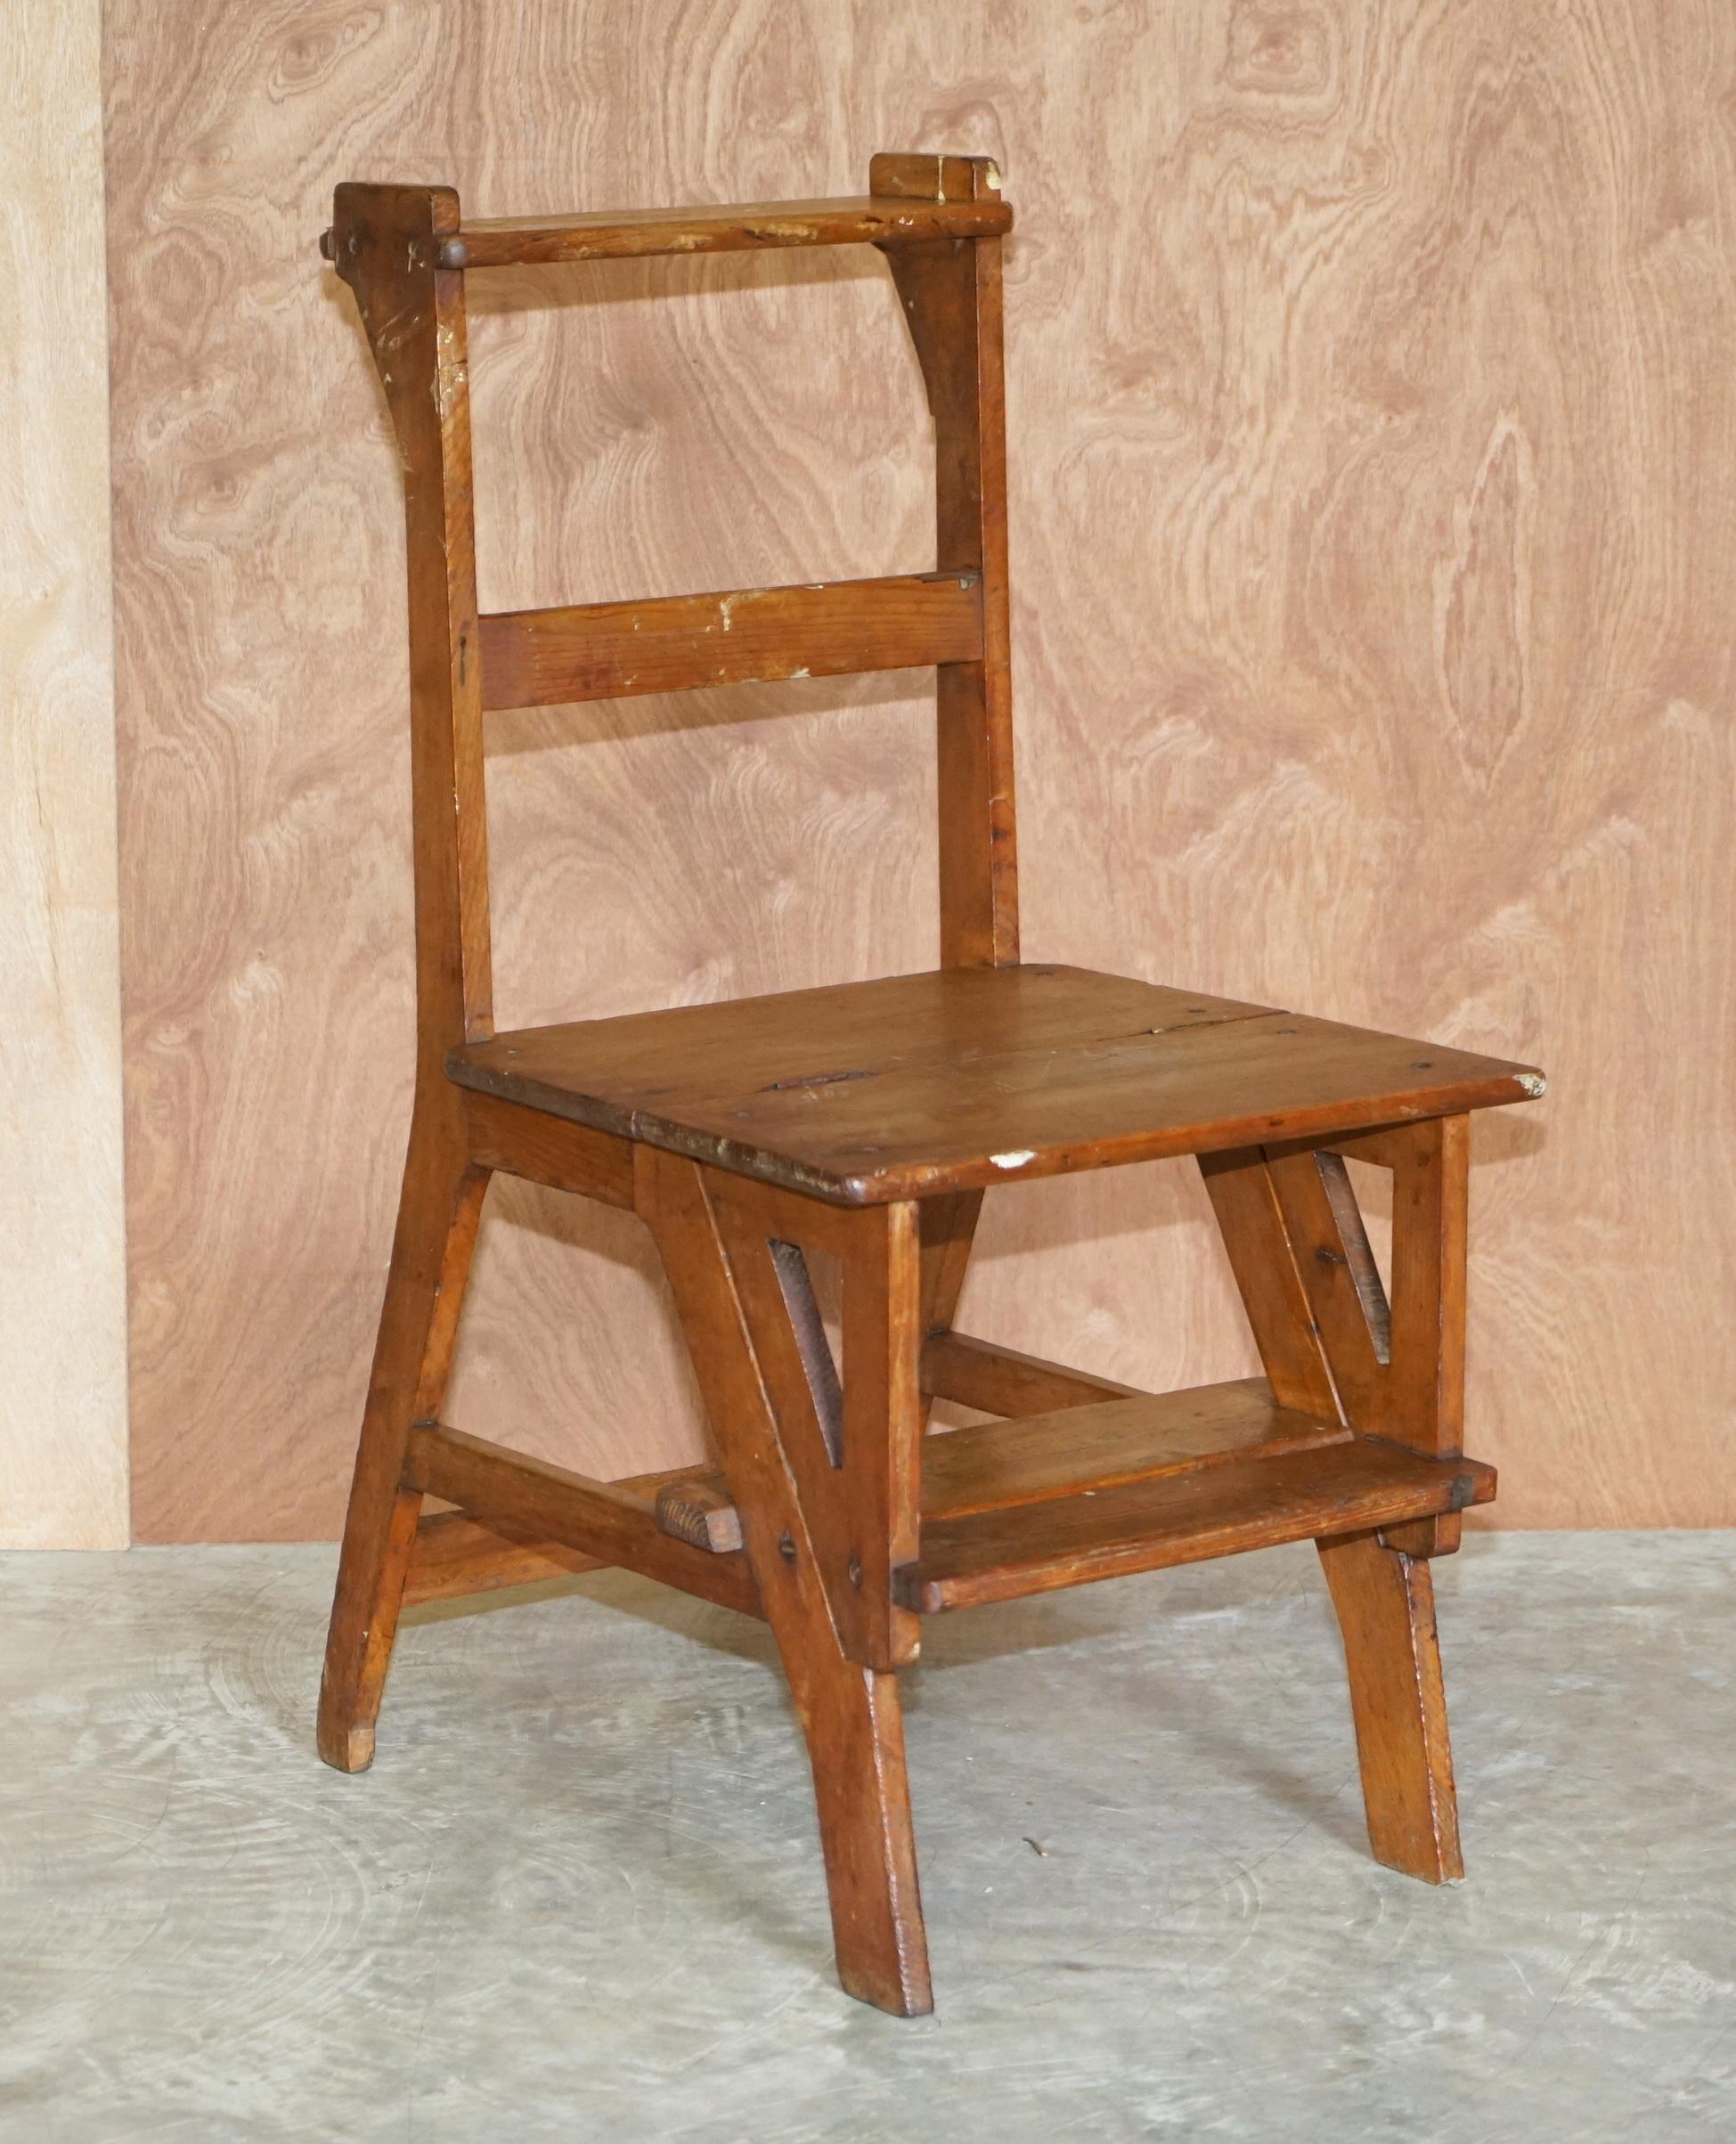 We are delighted to offer this lovely antique Victorian pine metamorphic library steps chair in oak

A very charming and highly collectable piece, designed as an at home library steps and reading chair, these are used to add a sense of grand